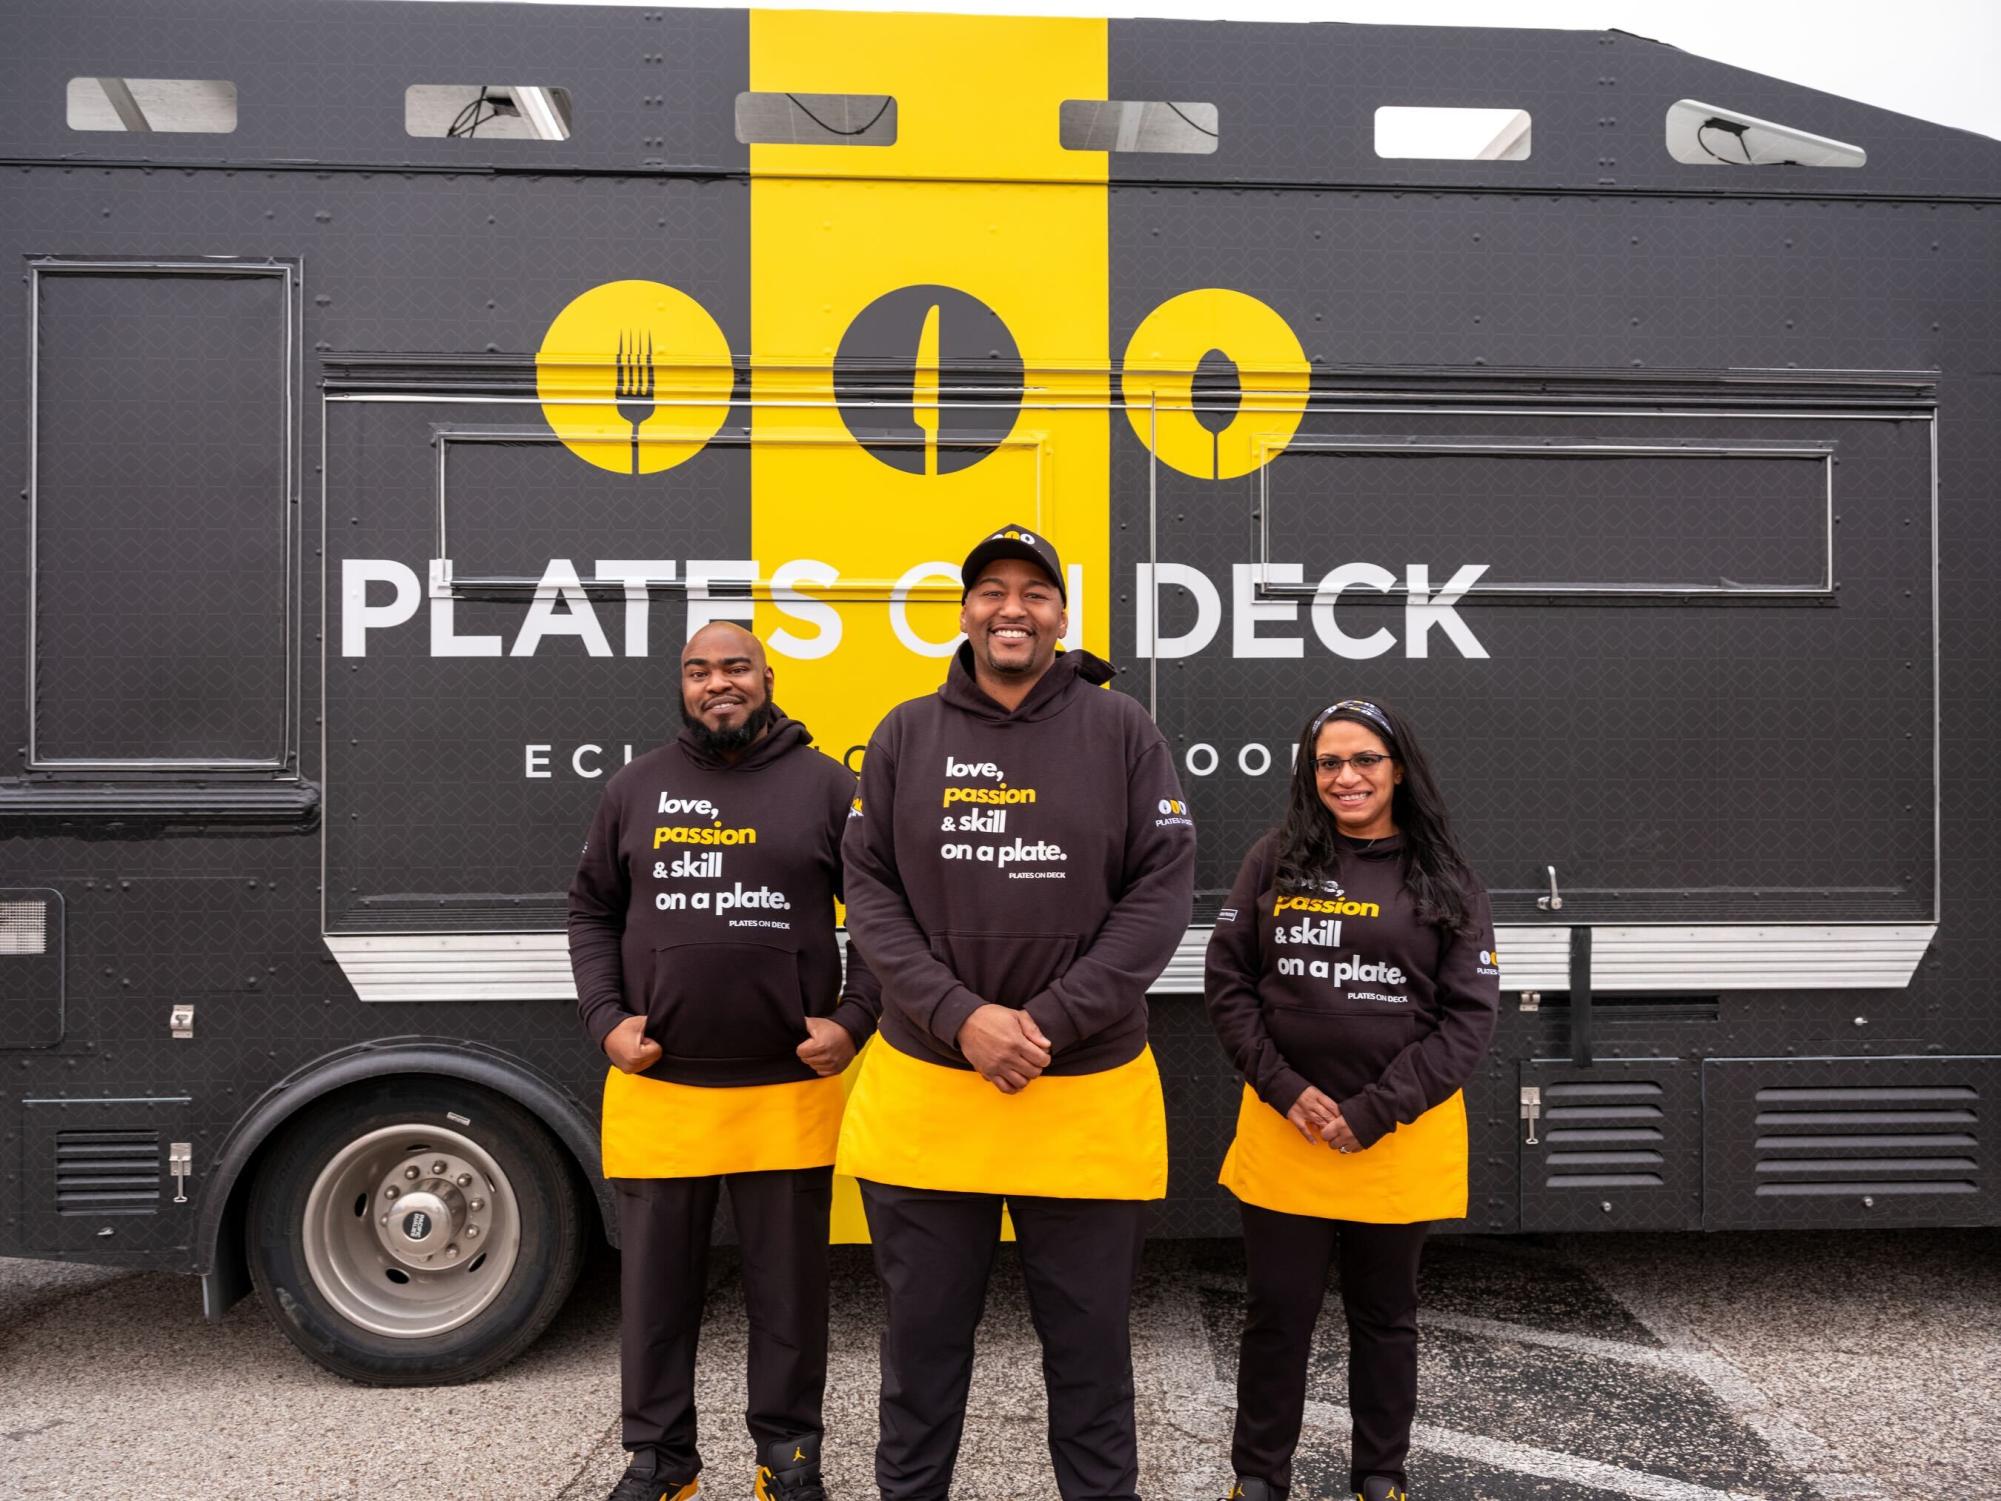 Team Plates on Deck on The Great Food Truck Race